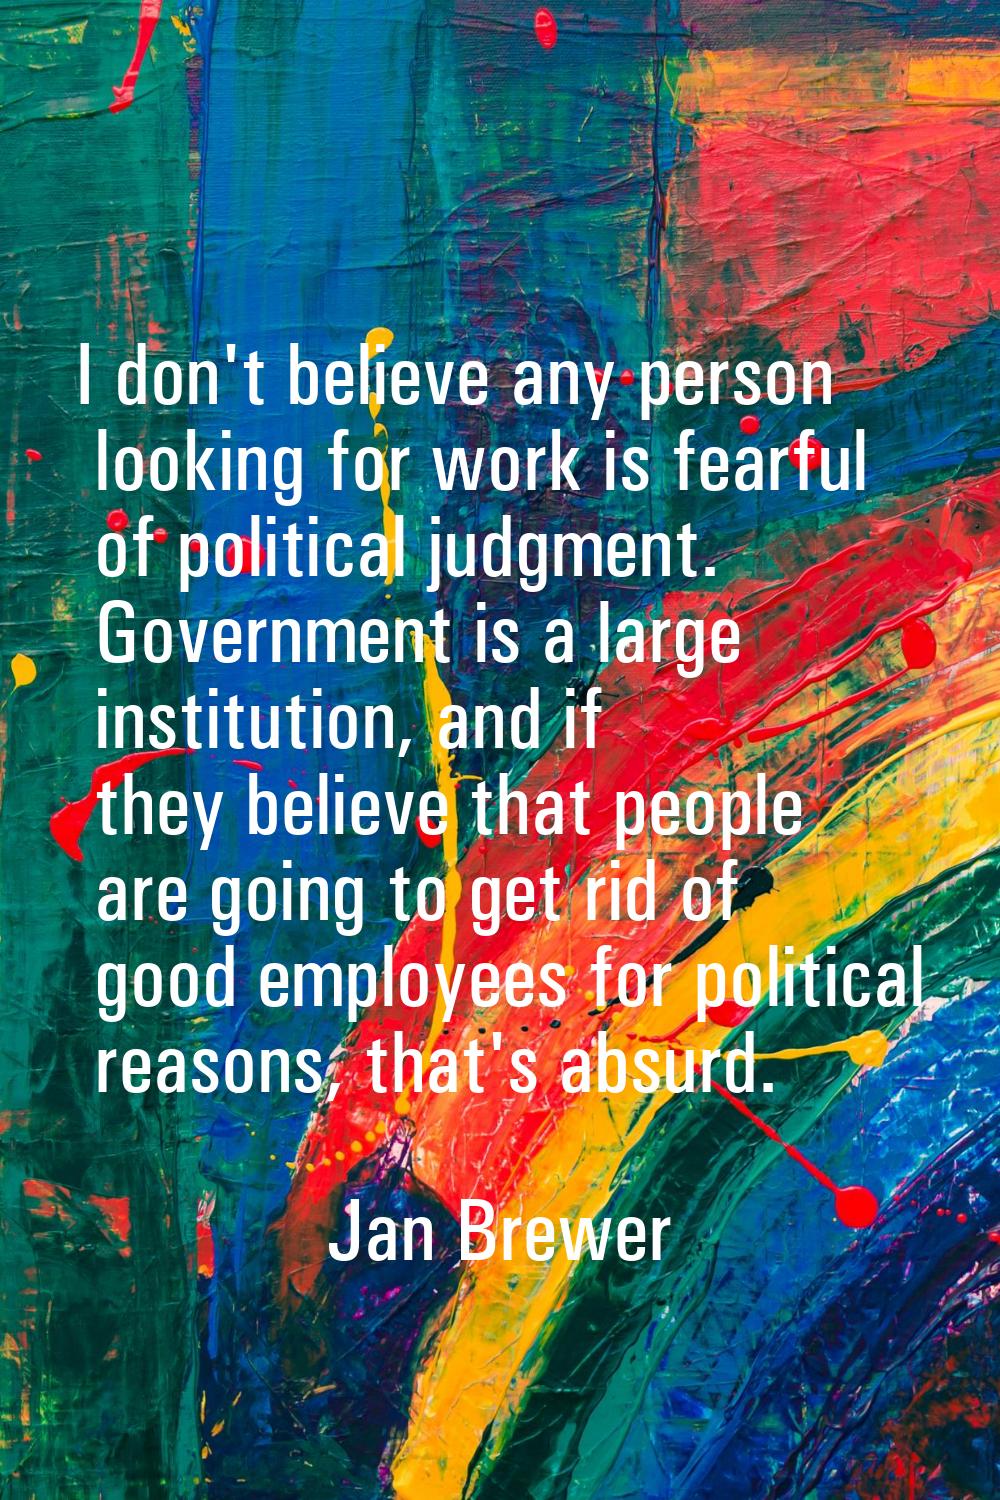 I don't believe any person looking for work is fearful of political judgment. Government is a large